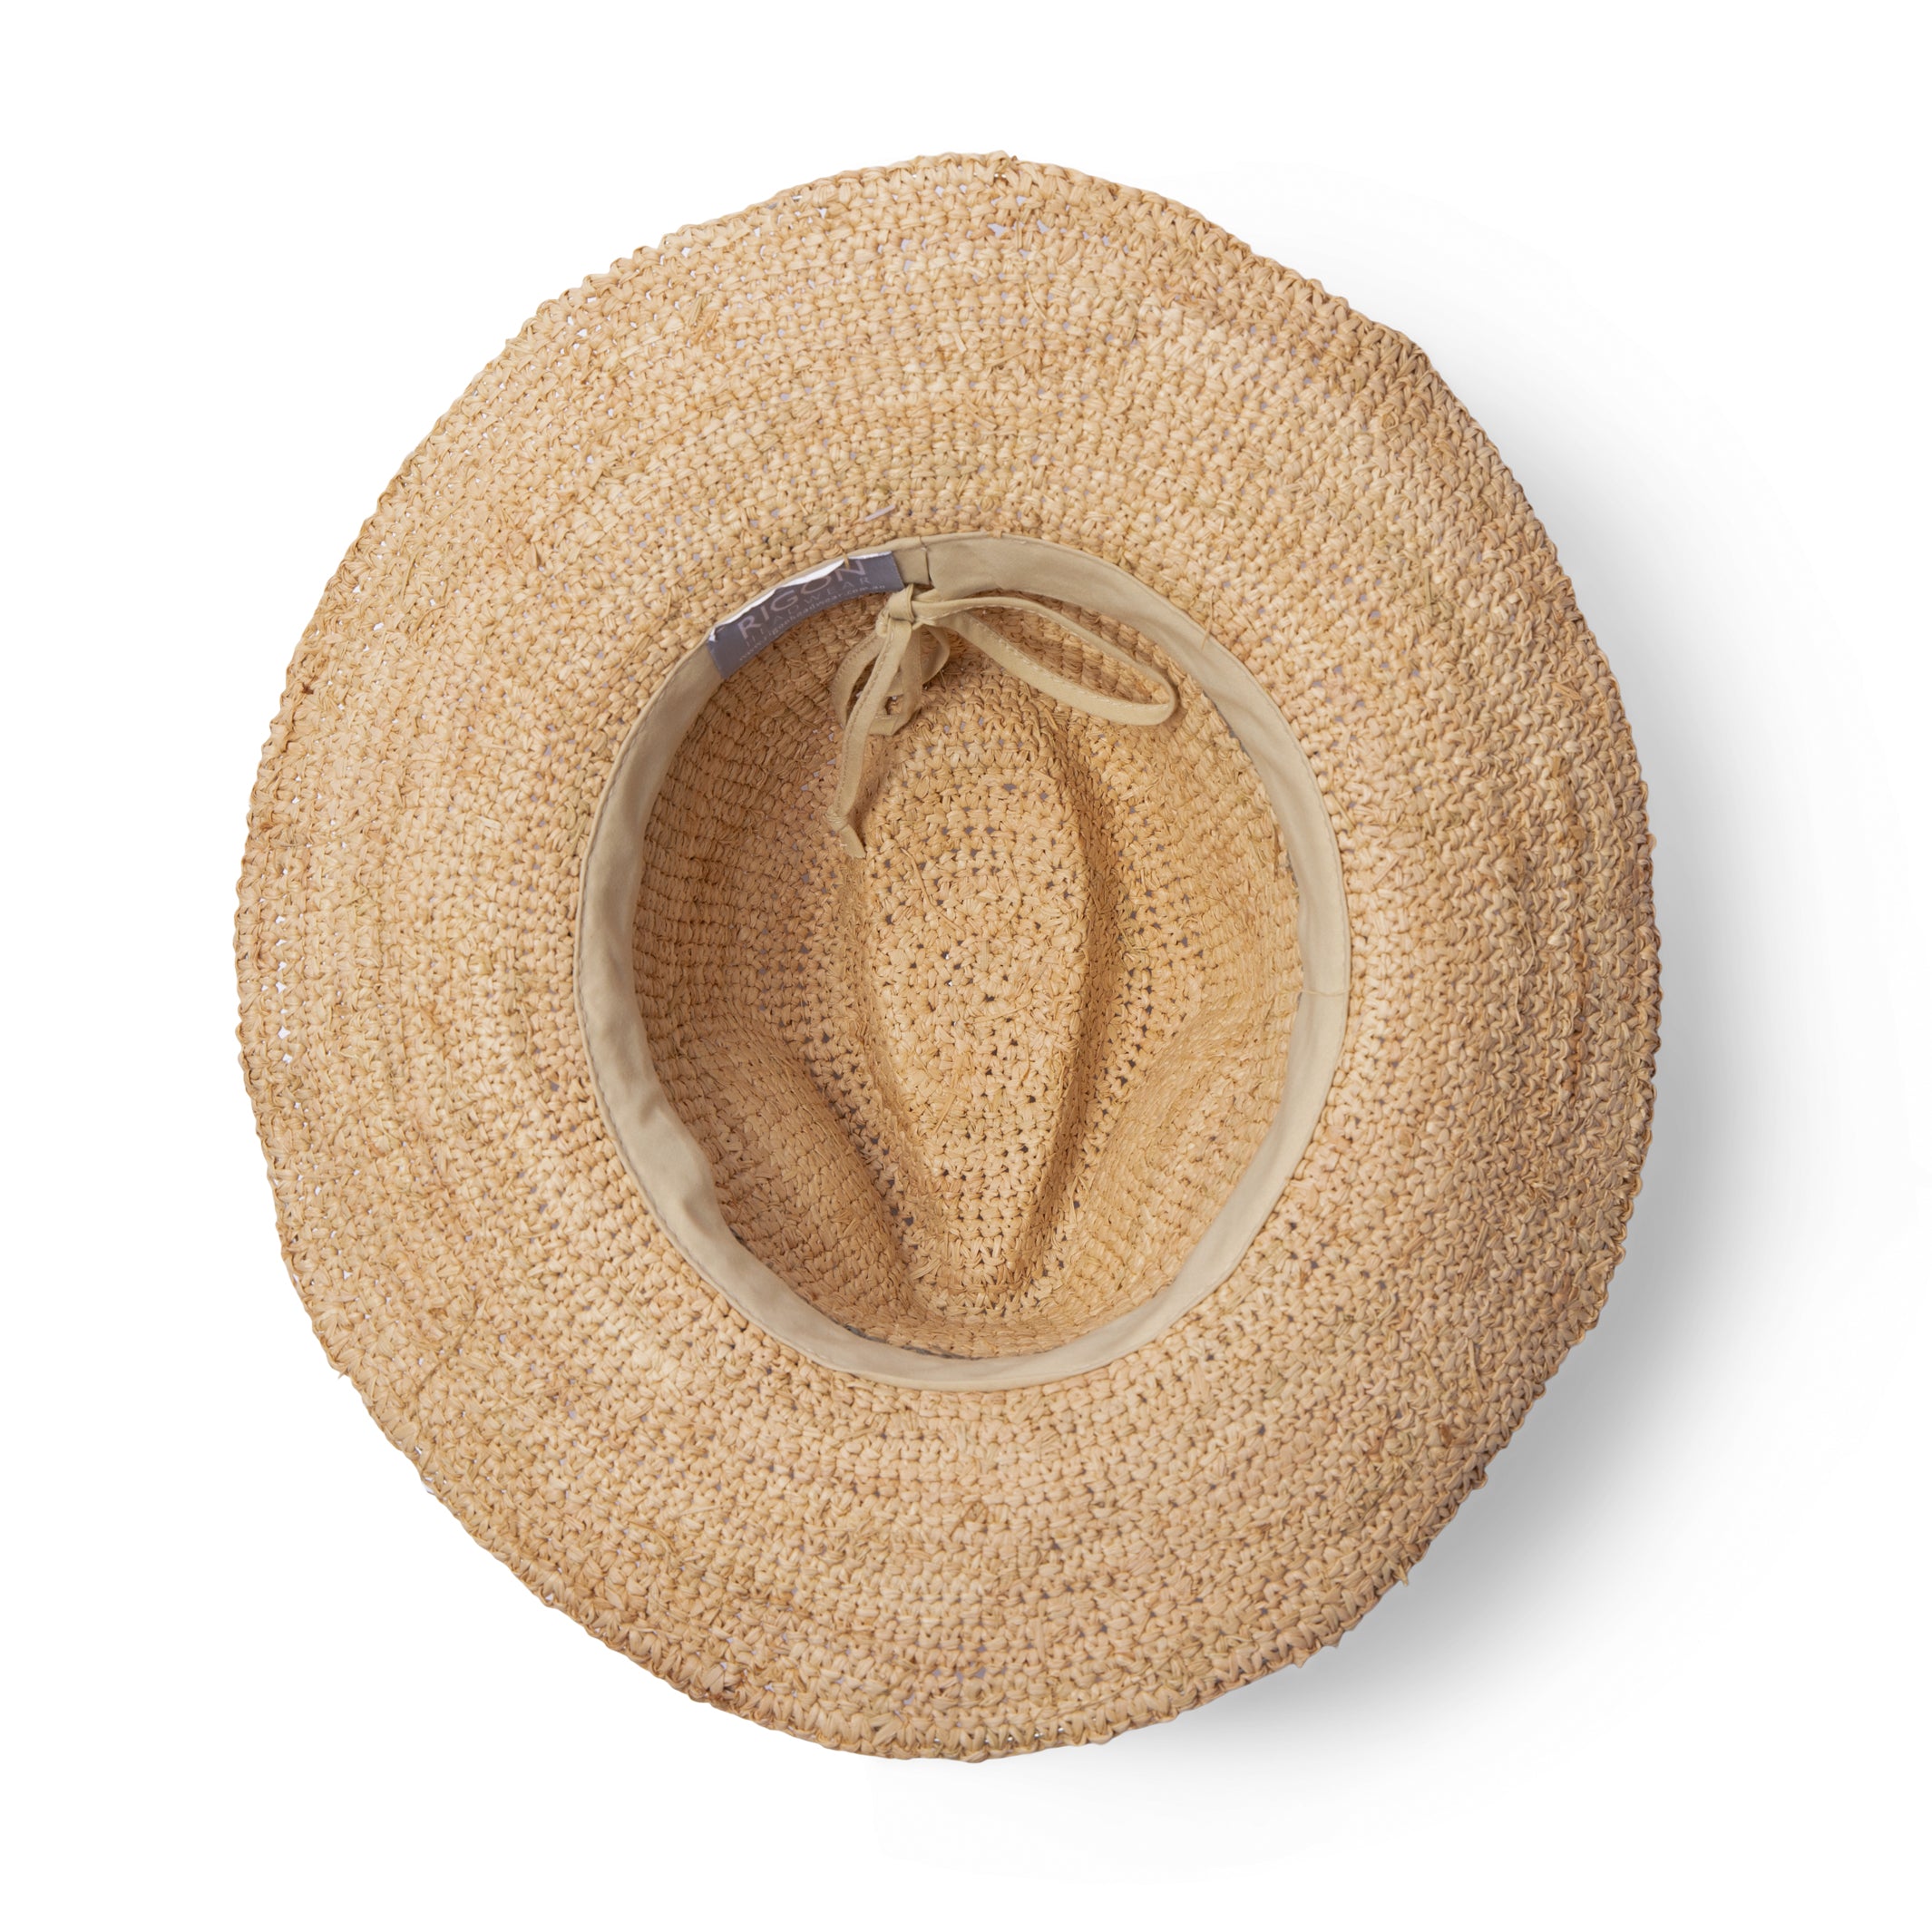 Castaway Hat Co. - Beach Straw Hats. Hats that clean our Seas.